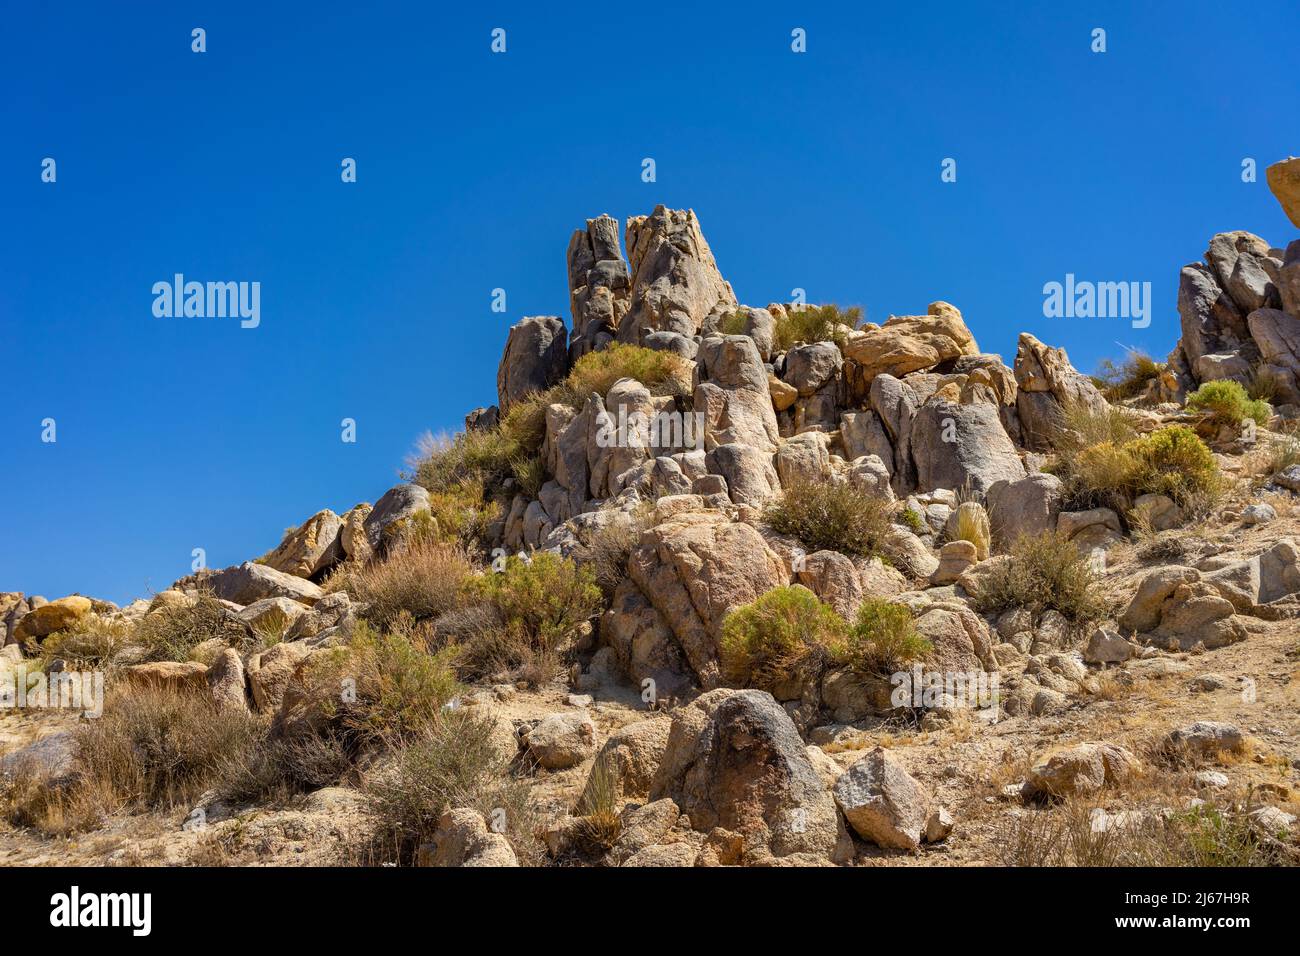 Low angel view of a hill with boulders and rocks in the Mojave Desert Stock Photo